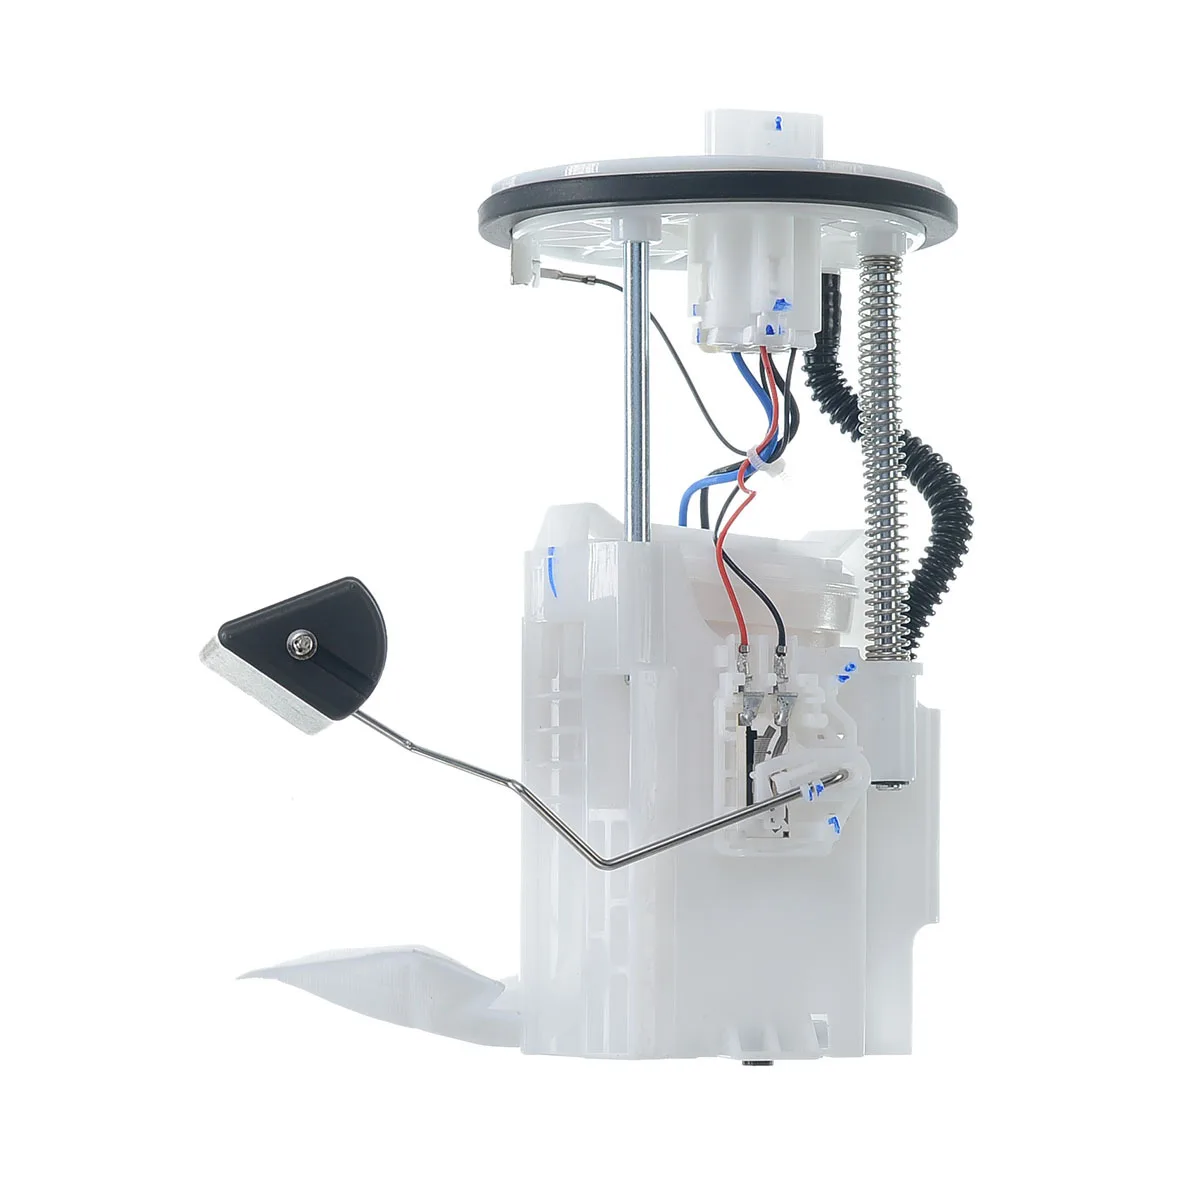 

In-stock CN US Electrical Fuel Pump Module Assembly for Toyota Camry 2.4L 2.5L 2007-2011 E8937M E8937M